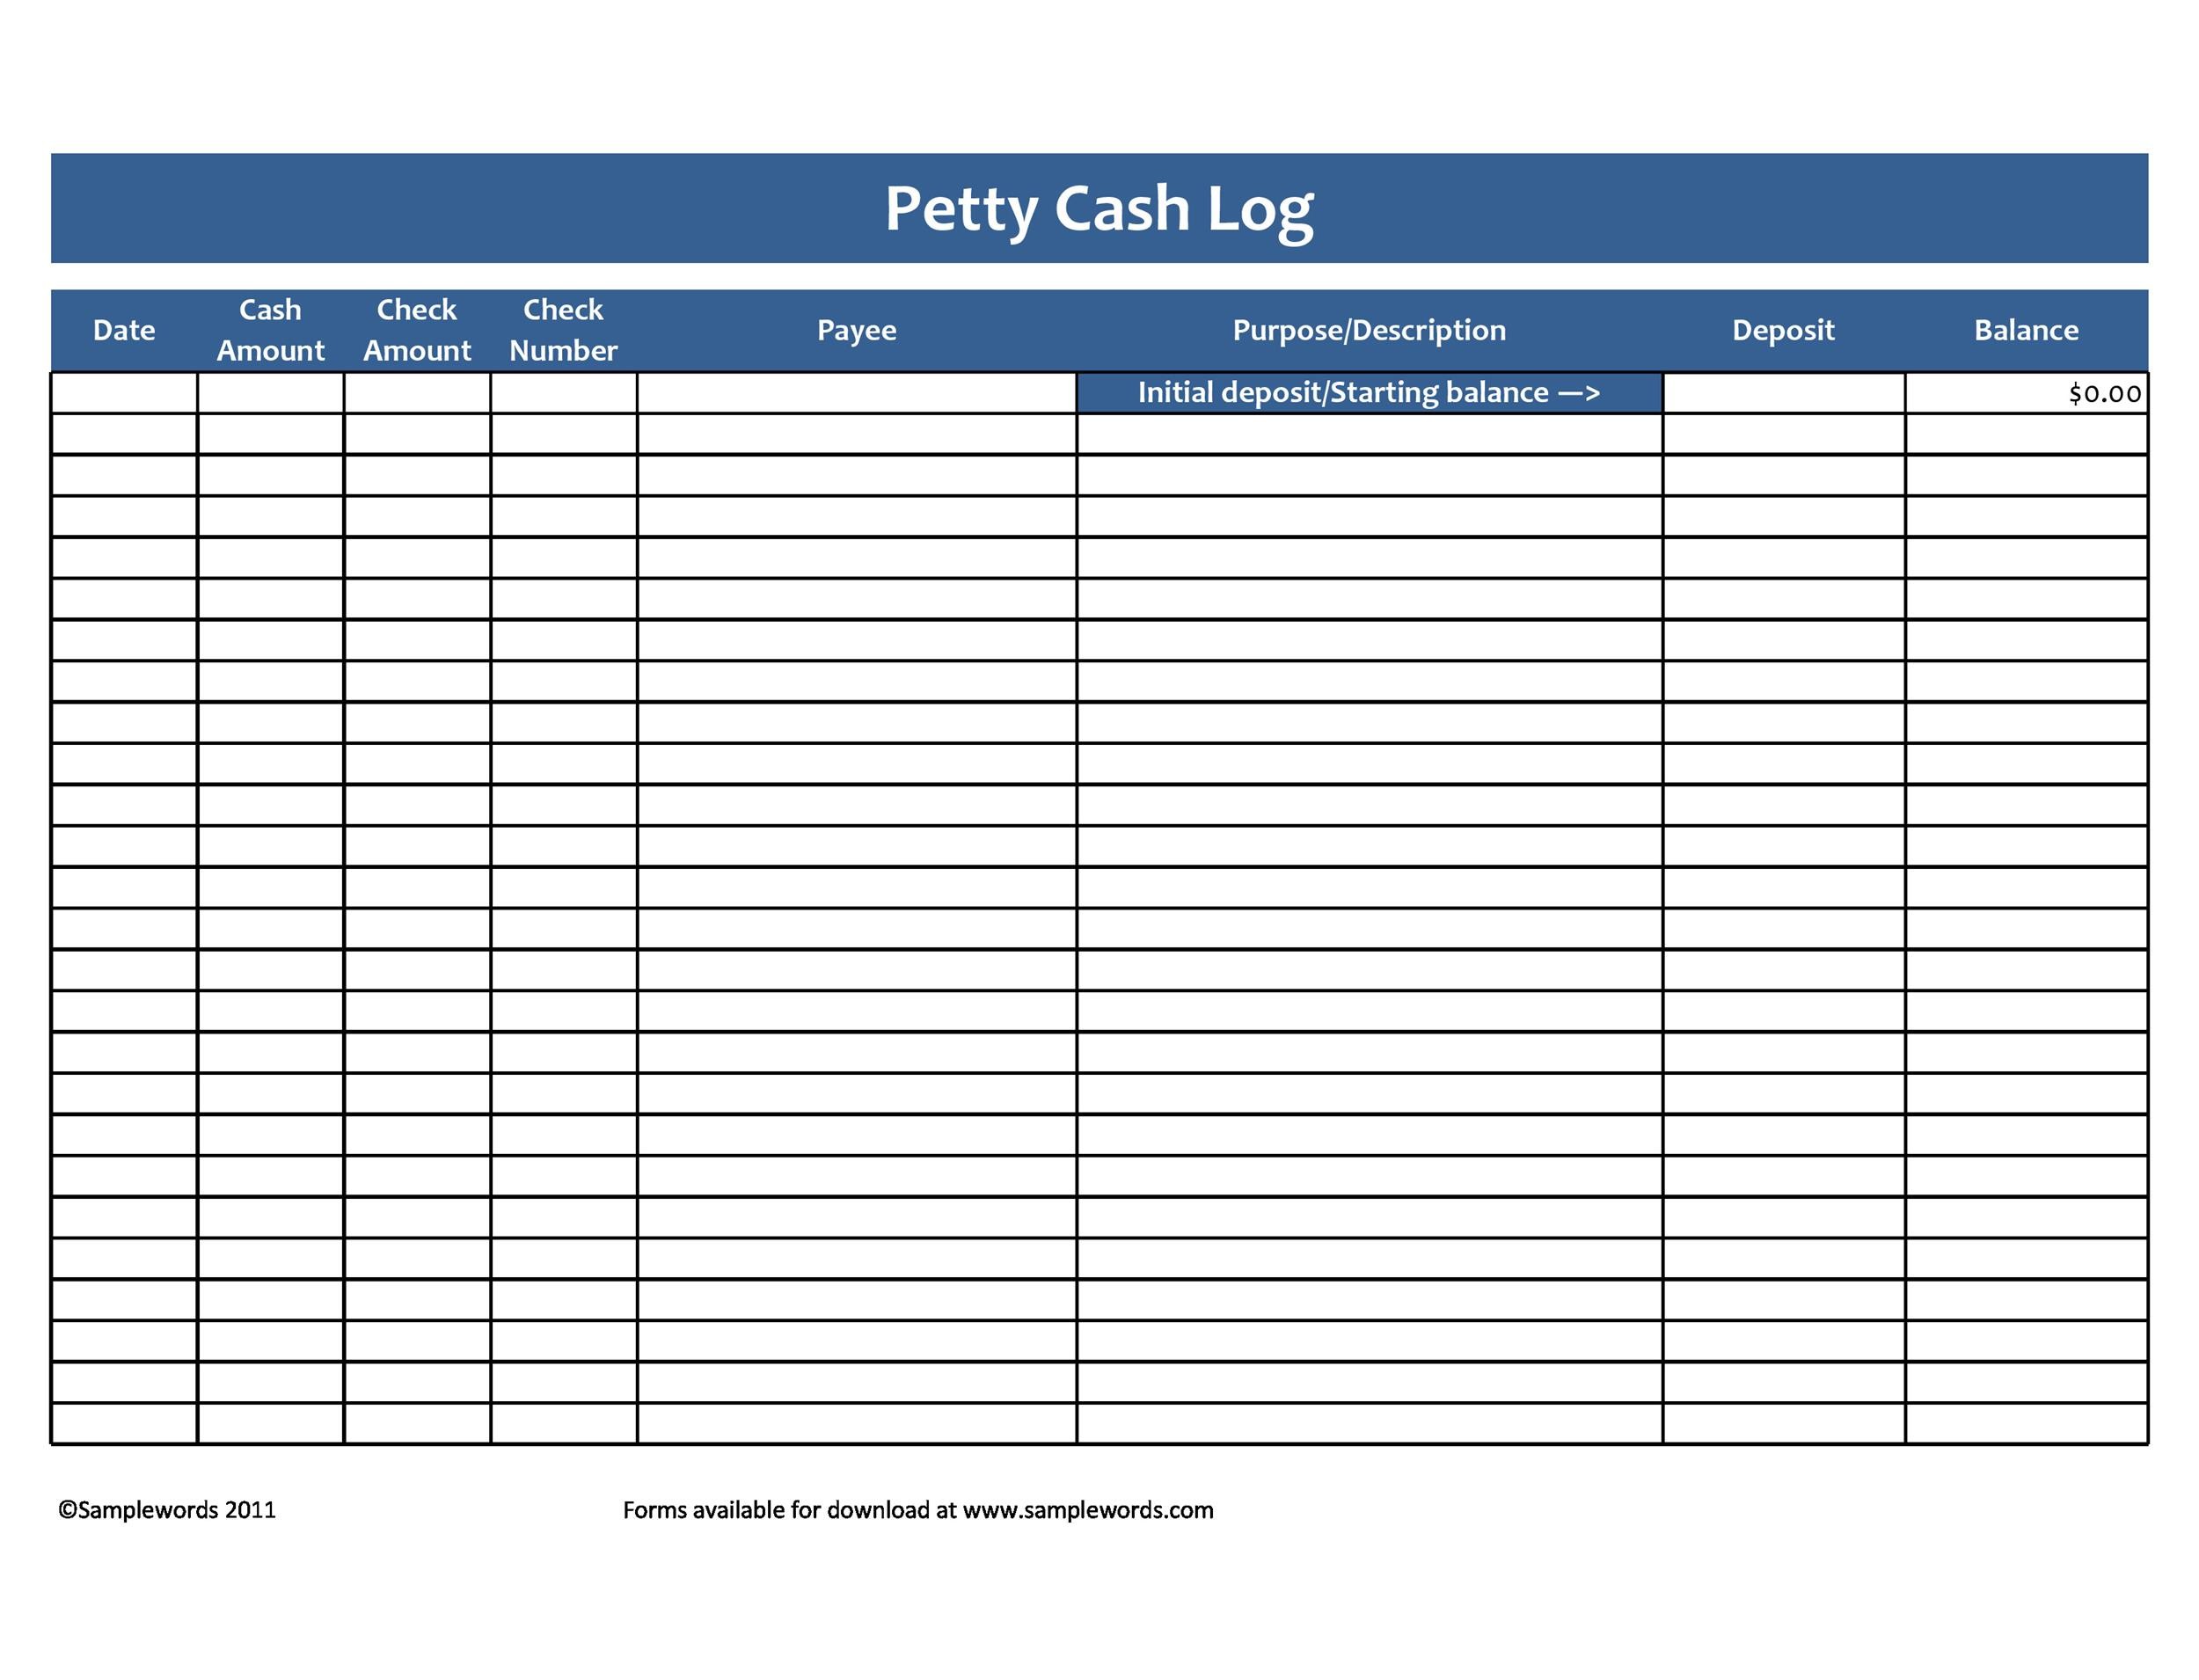 Daily Cash Balance Sheet Template The Sale Register Is A Log Of Each Sale Made During The Day